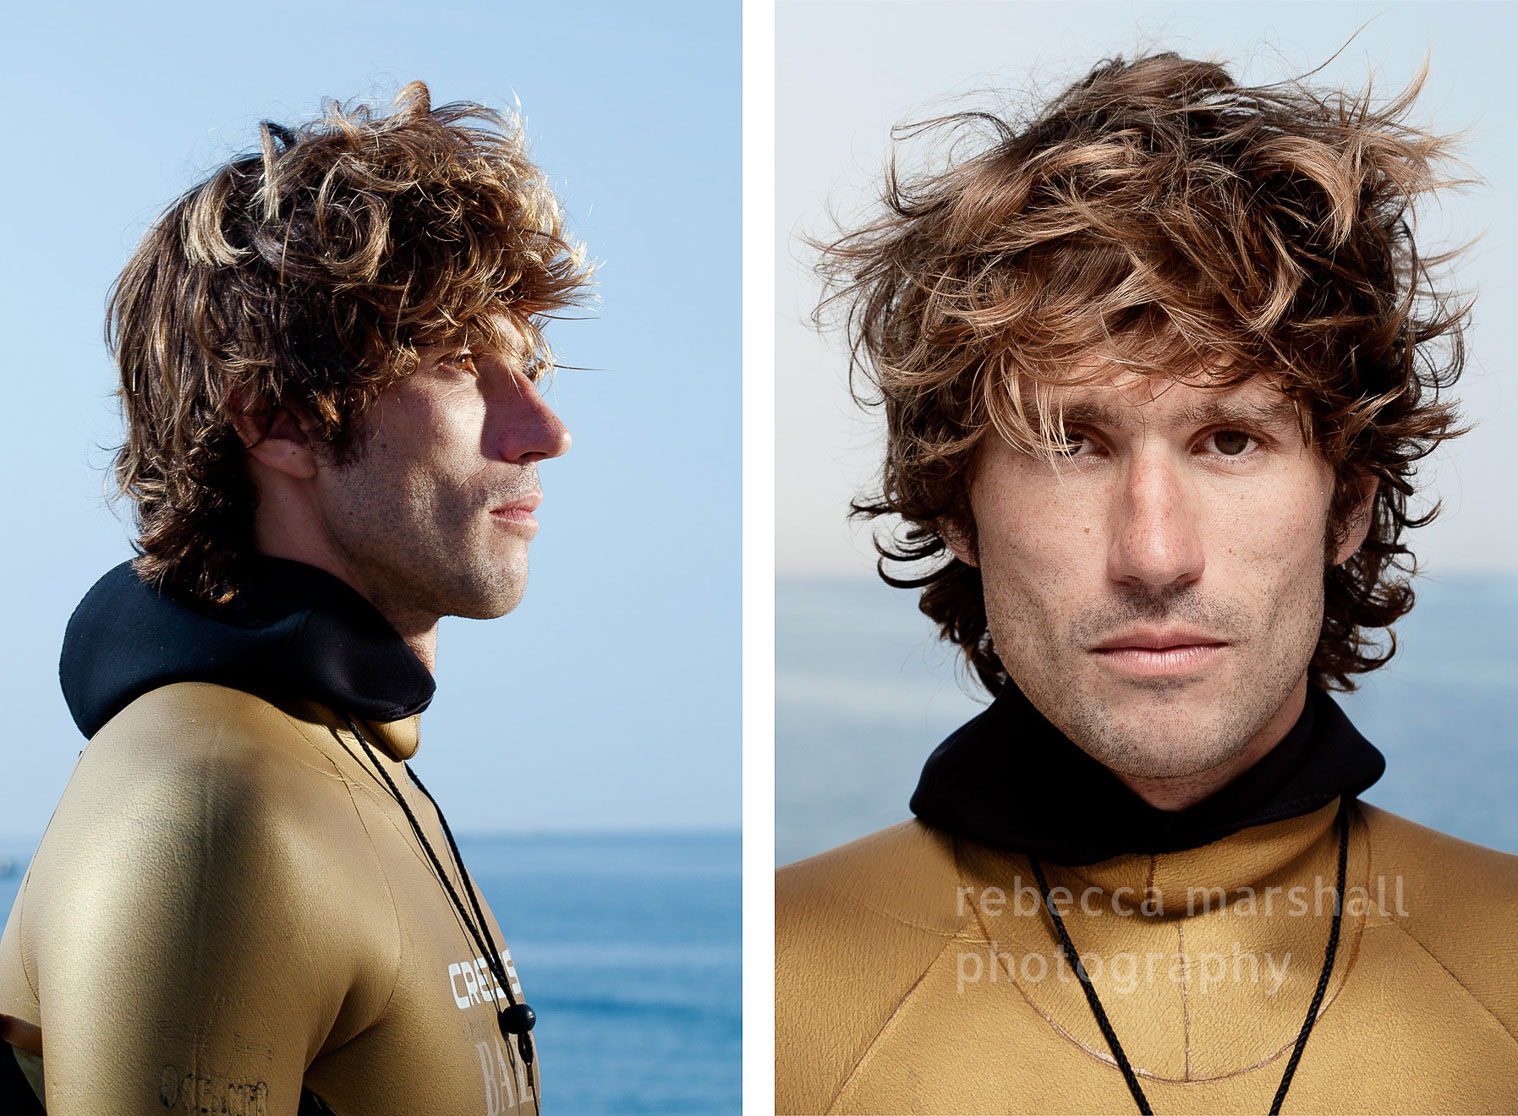 Portrait of French champion freediver Guillaume Néry